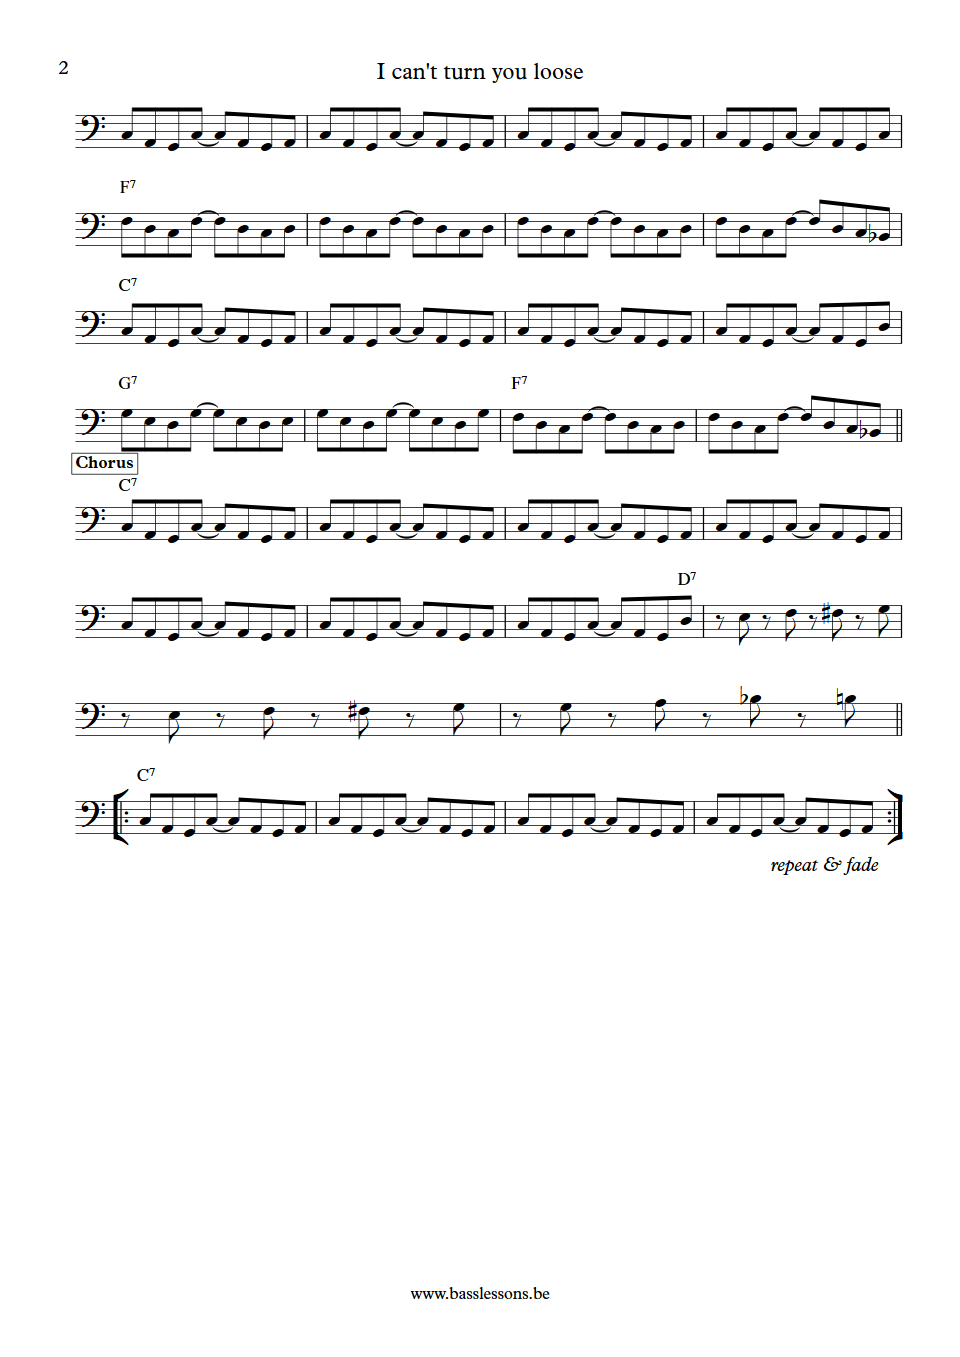 I can't turn you loose bass transcription